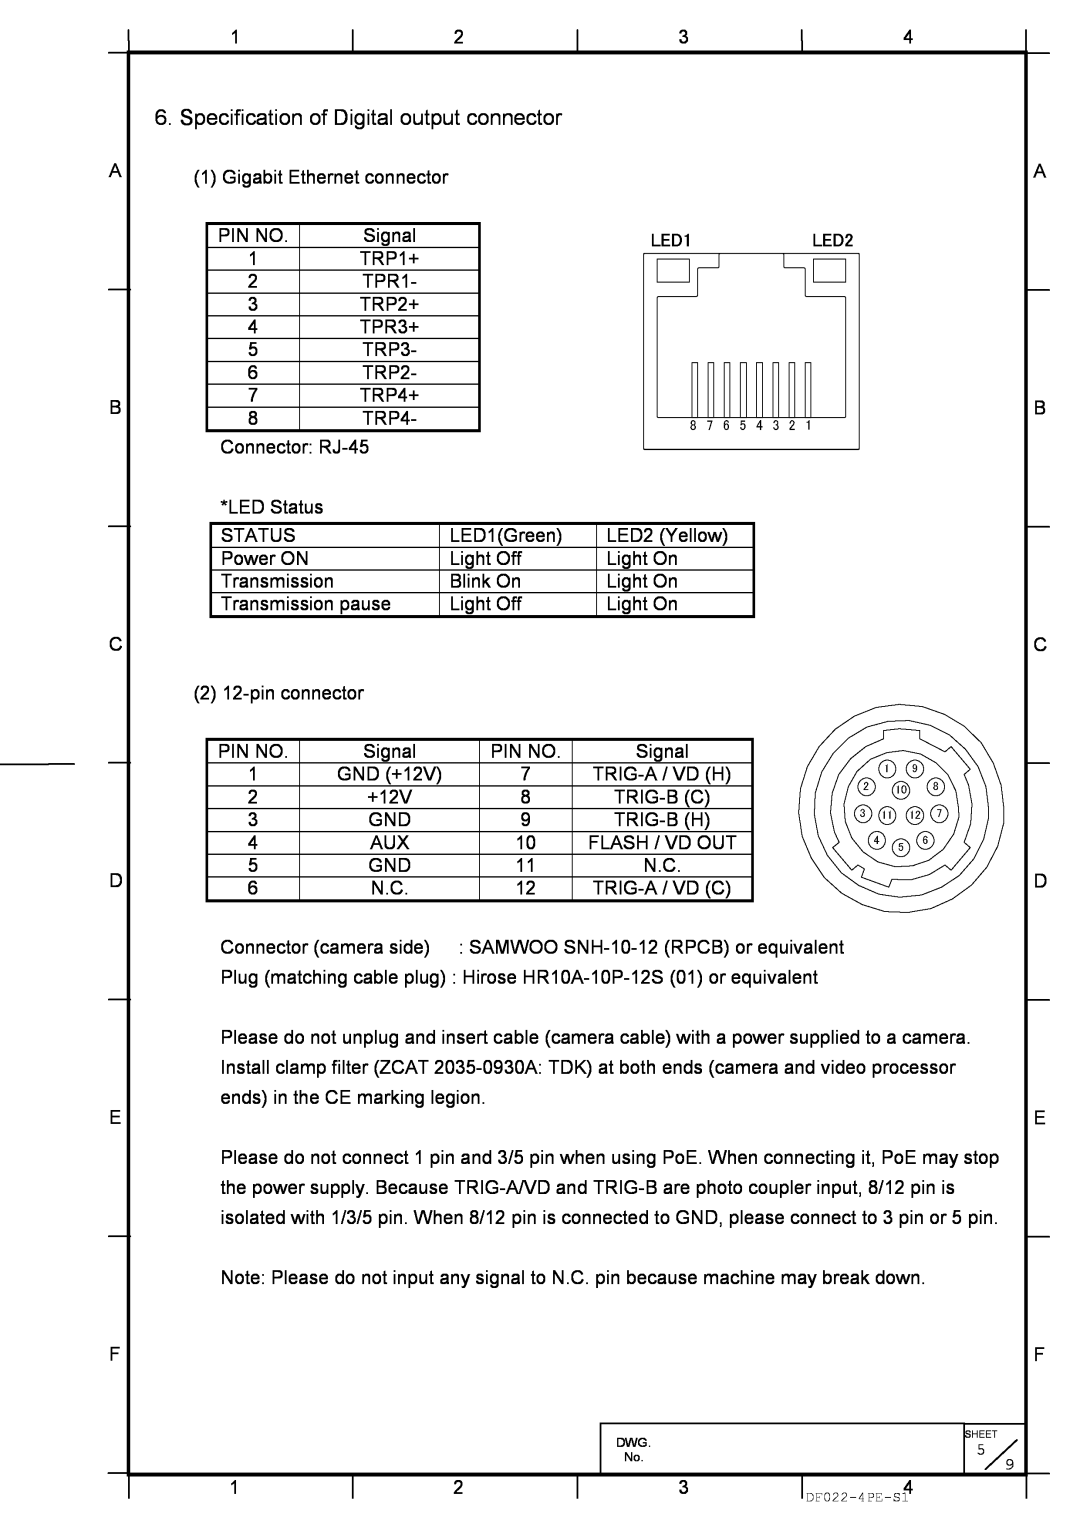 Hitachi KP-FD202GV specifications Specification of Digital output connector 